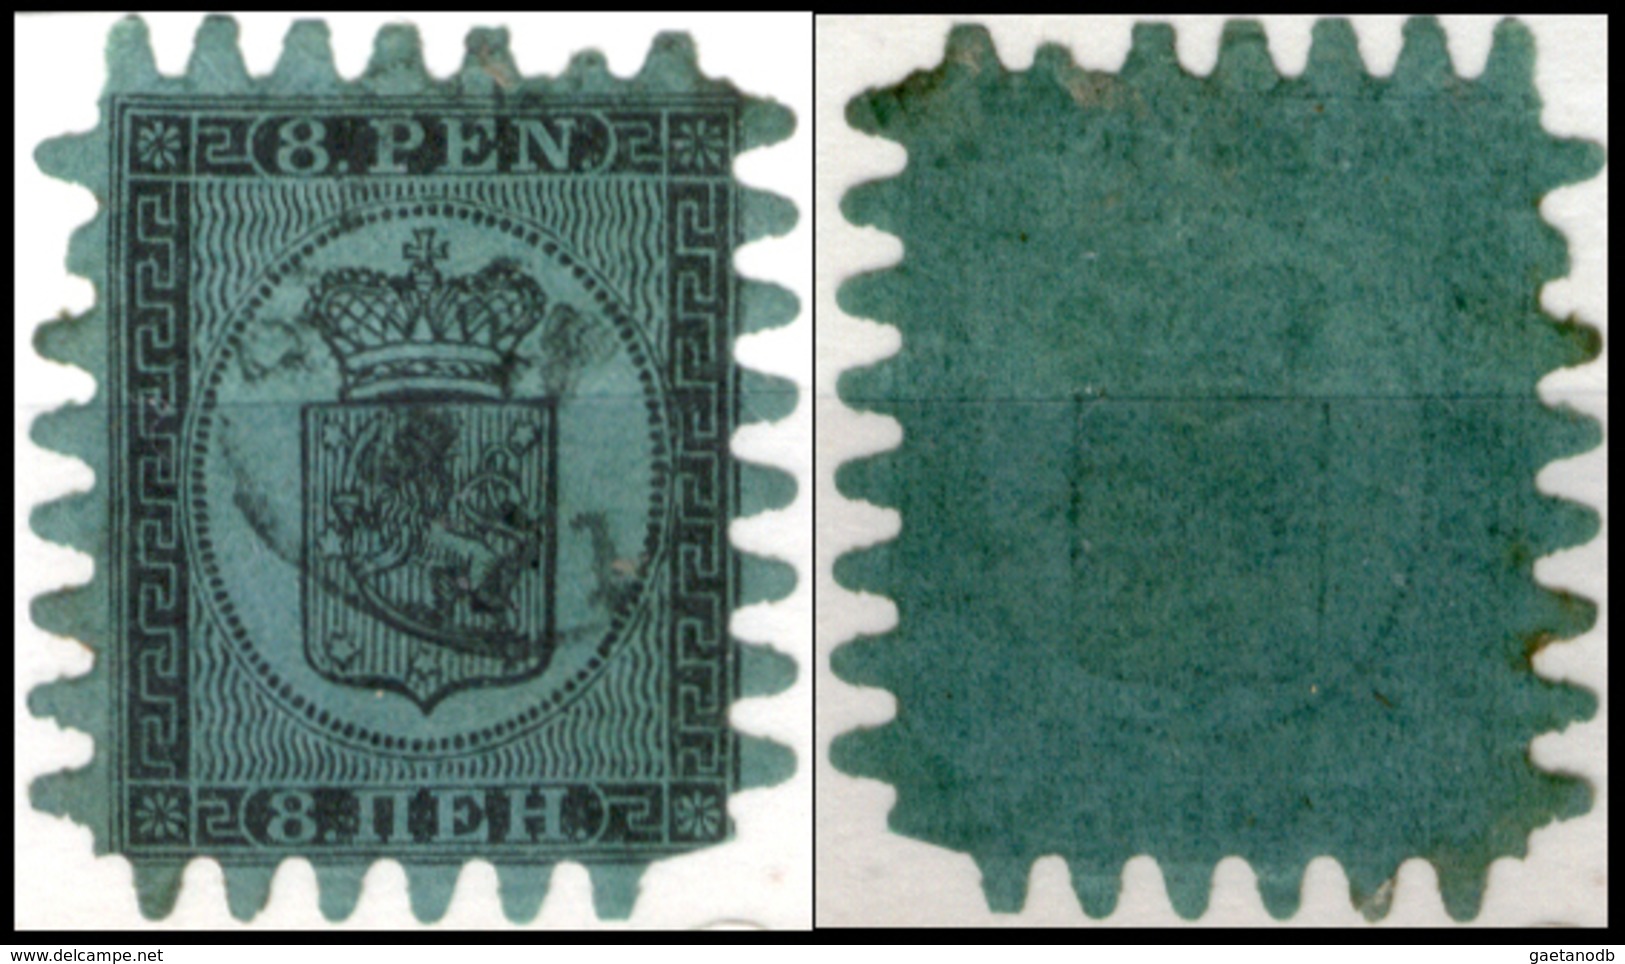 Finlandia-F001 -1866-70: Yvert & Tellier N. 6 (o) Used - Senza Difetti Occulti. - Used Stamps